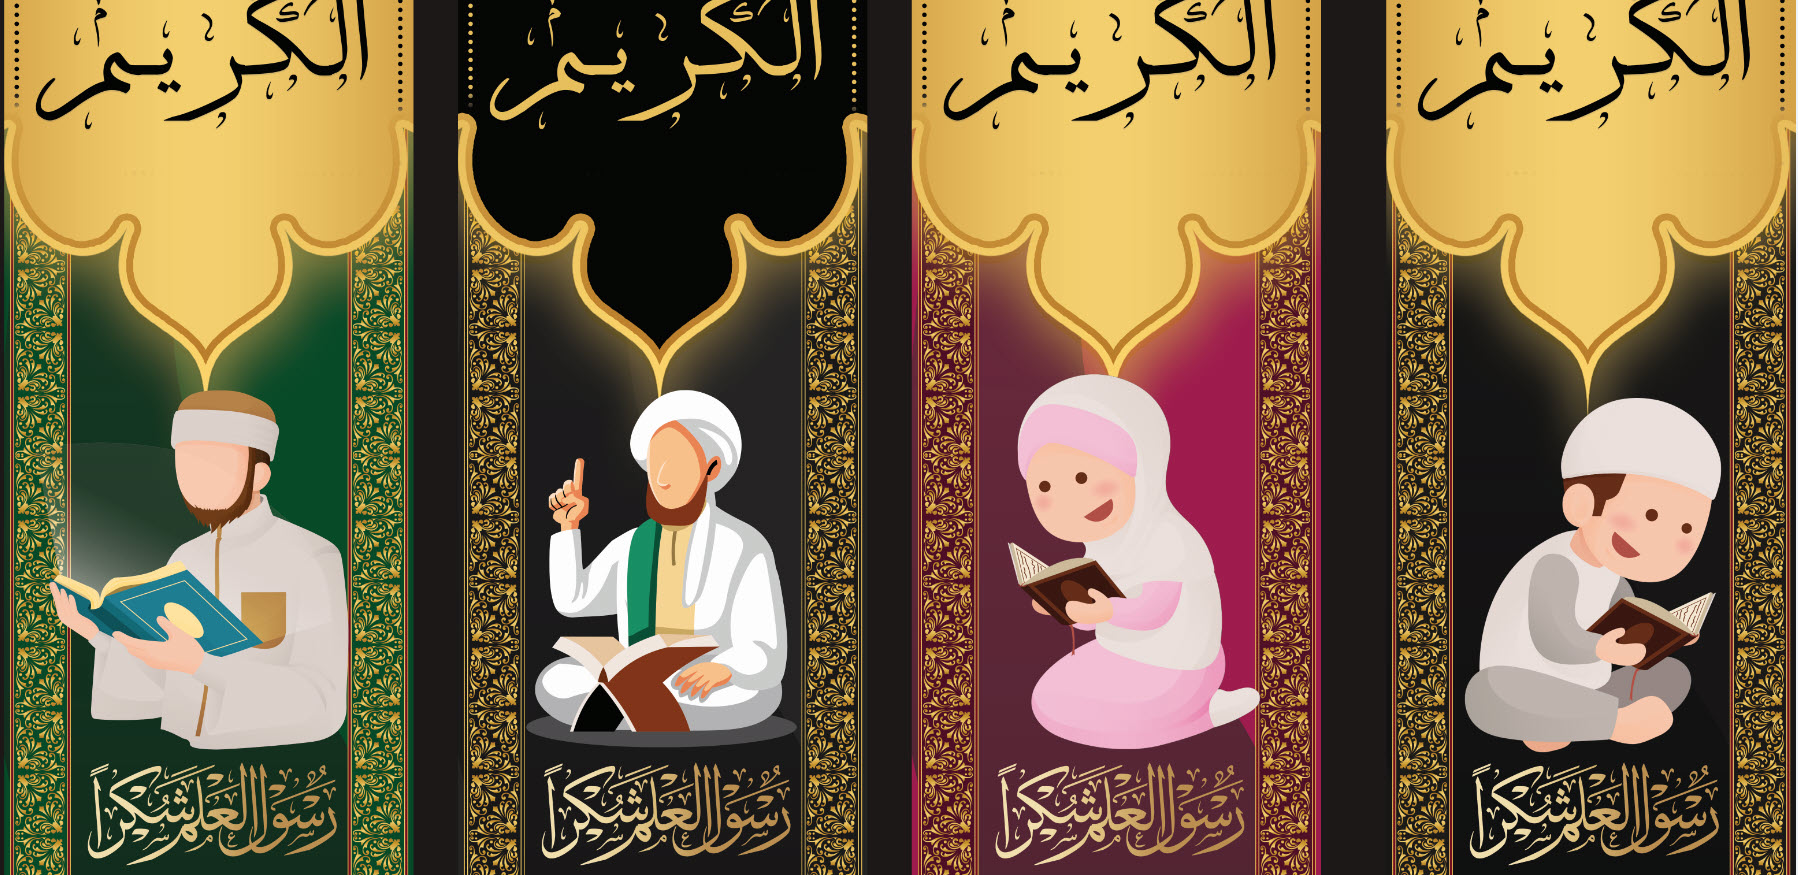 Design an Islamic scarf for memorizers of the Holy Quran. Free open source PSD file